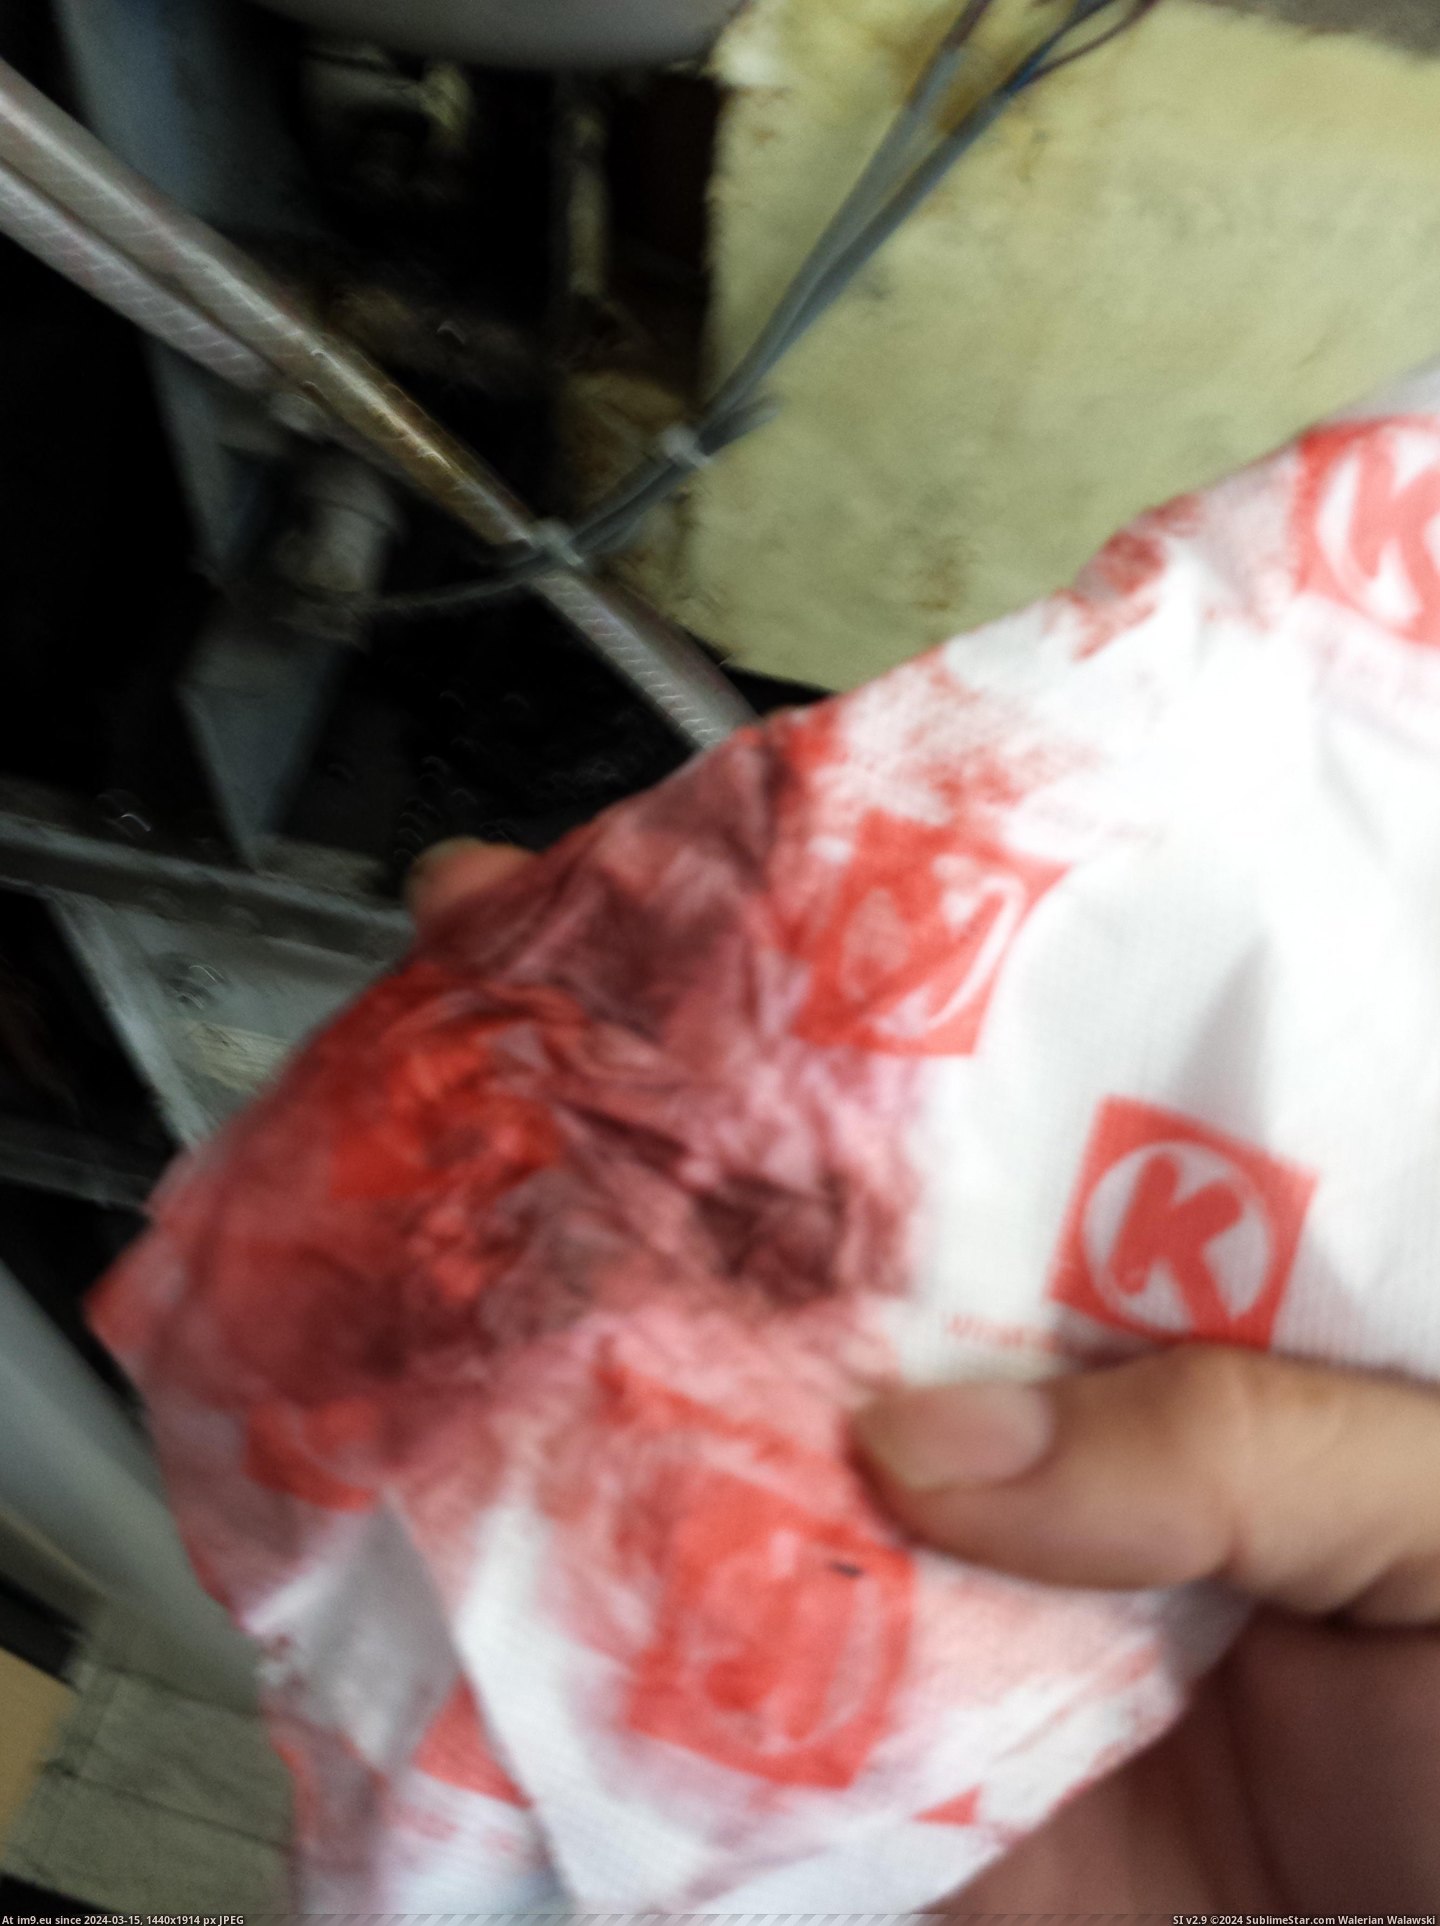 #Wtf #Drink #Frozen #Coke #Regularly #Beverage #Froster #Service #Anymore #Machines [Wtf] I service Froster frozen beverage machines regularly, and because of it, I don't drink coke anymore. 1 Pic. (Изображение из альбом My r/WTF favs))